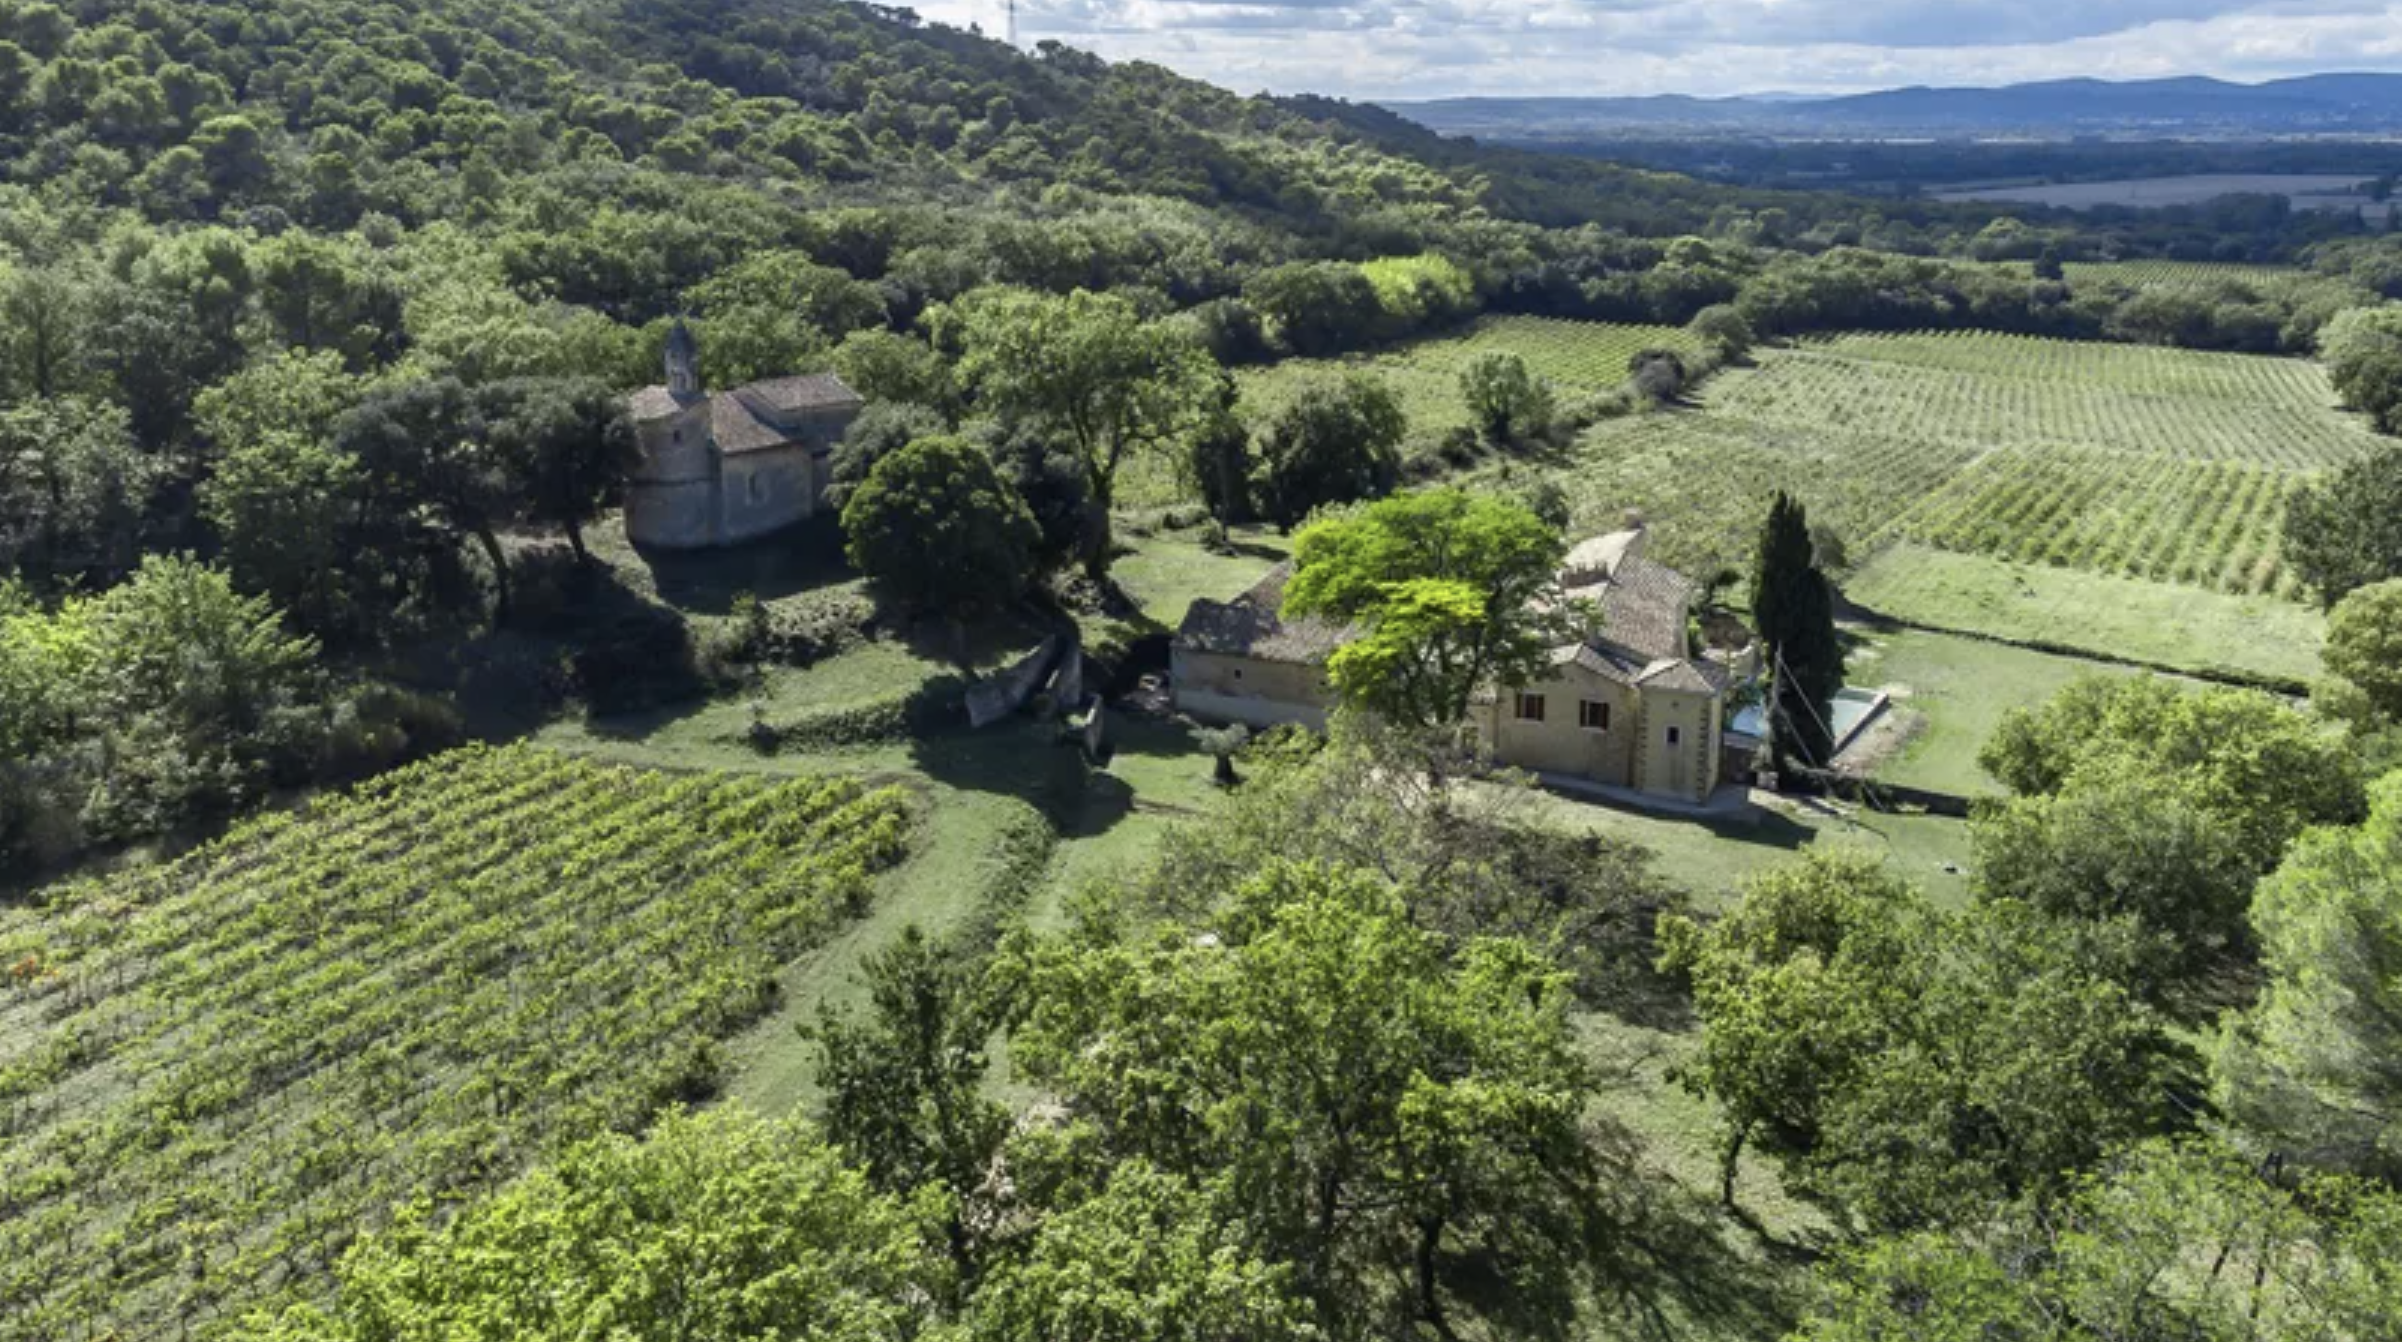 Francis+York+Renovated Historic Residence and 98 Acre Estate in Provence, France  00004.png